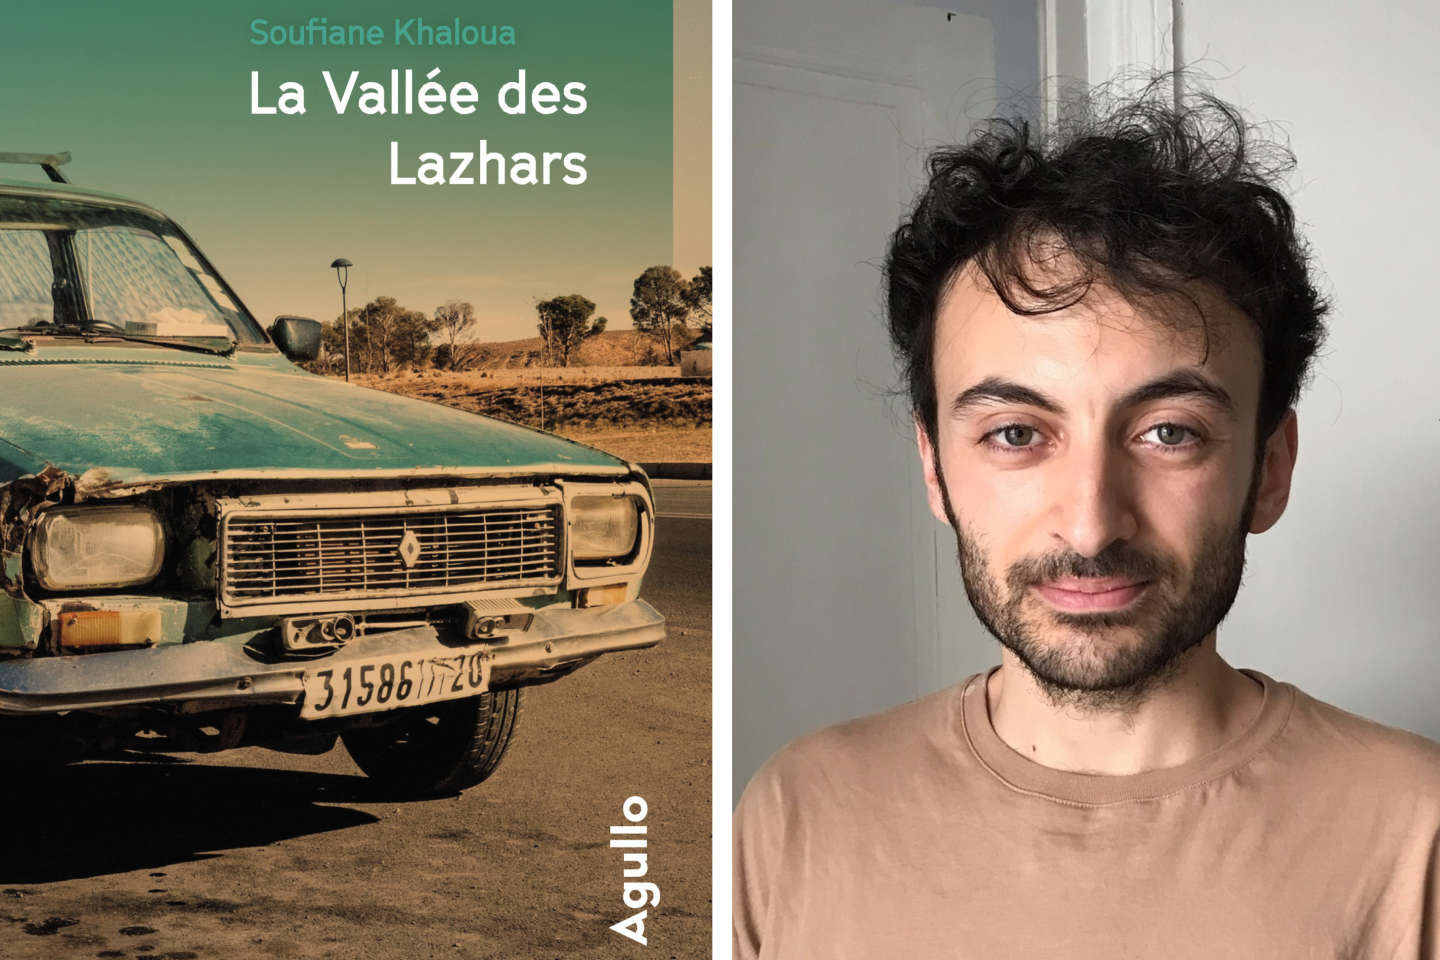 “La Vallée des Lazhars”, by Soufiane Khaloua: a story of love and struggle between two clans on the eastern border of Morocco